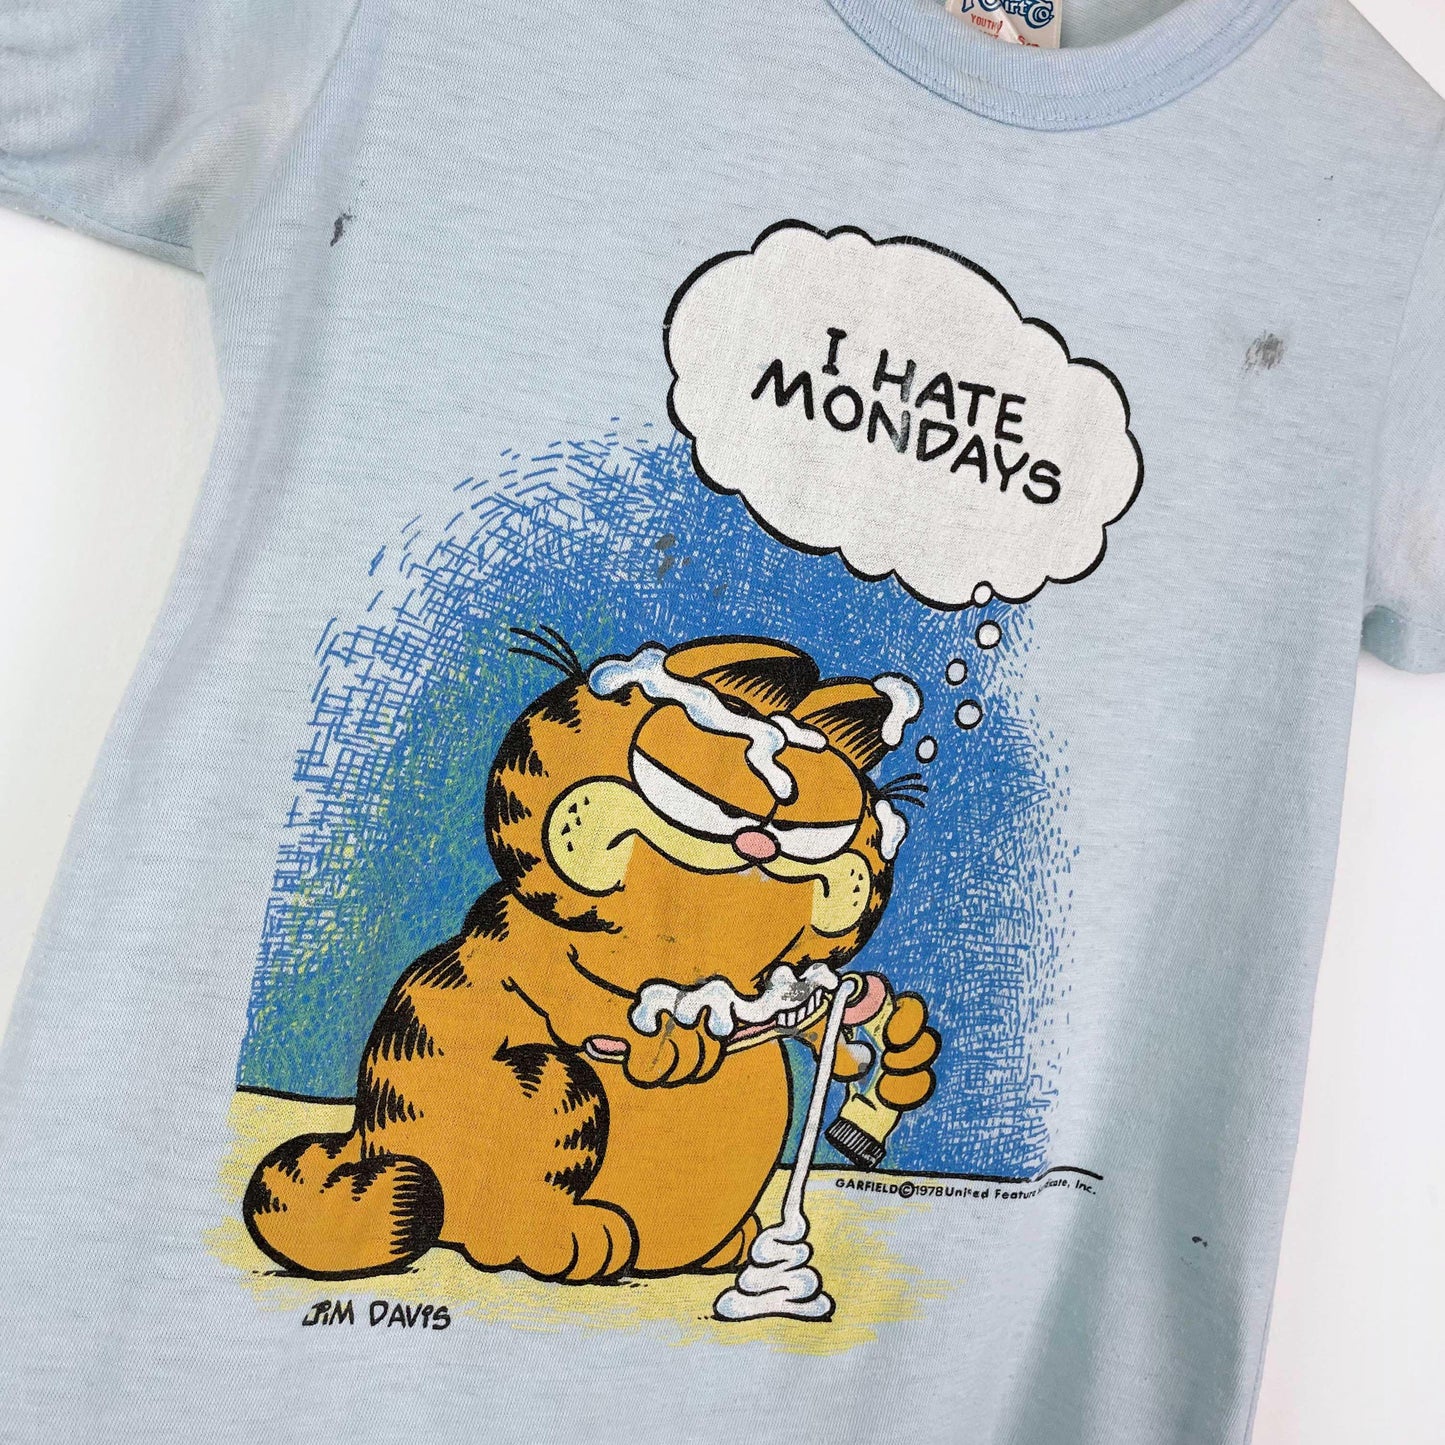 vintage 70s garfield ringer tee - size small